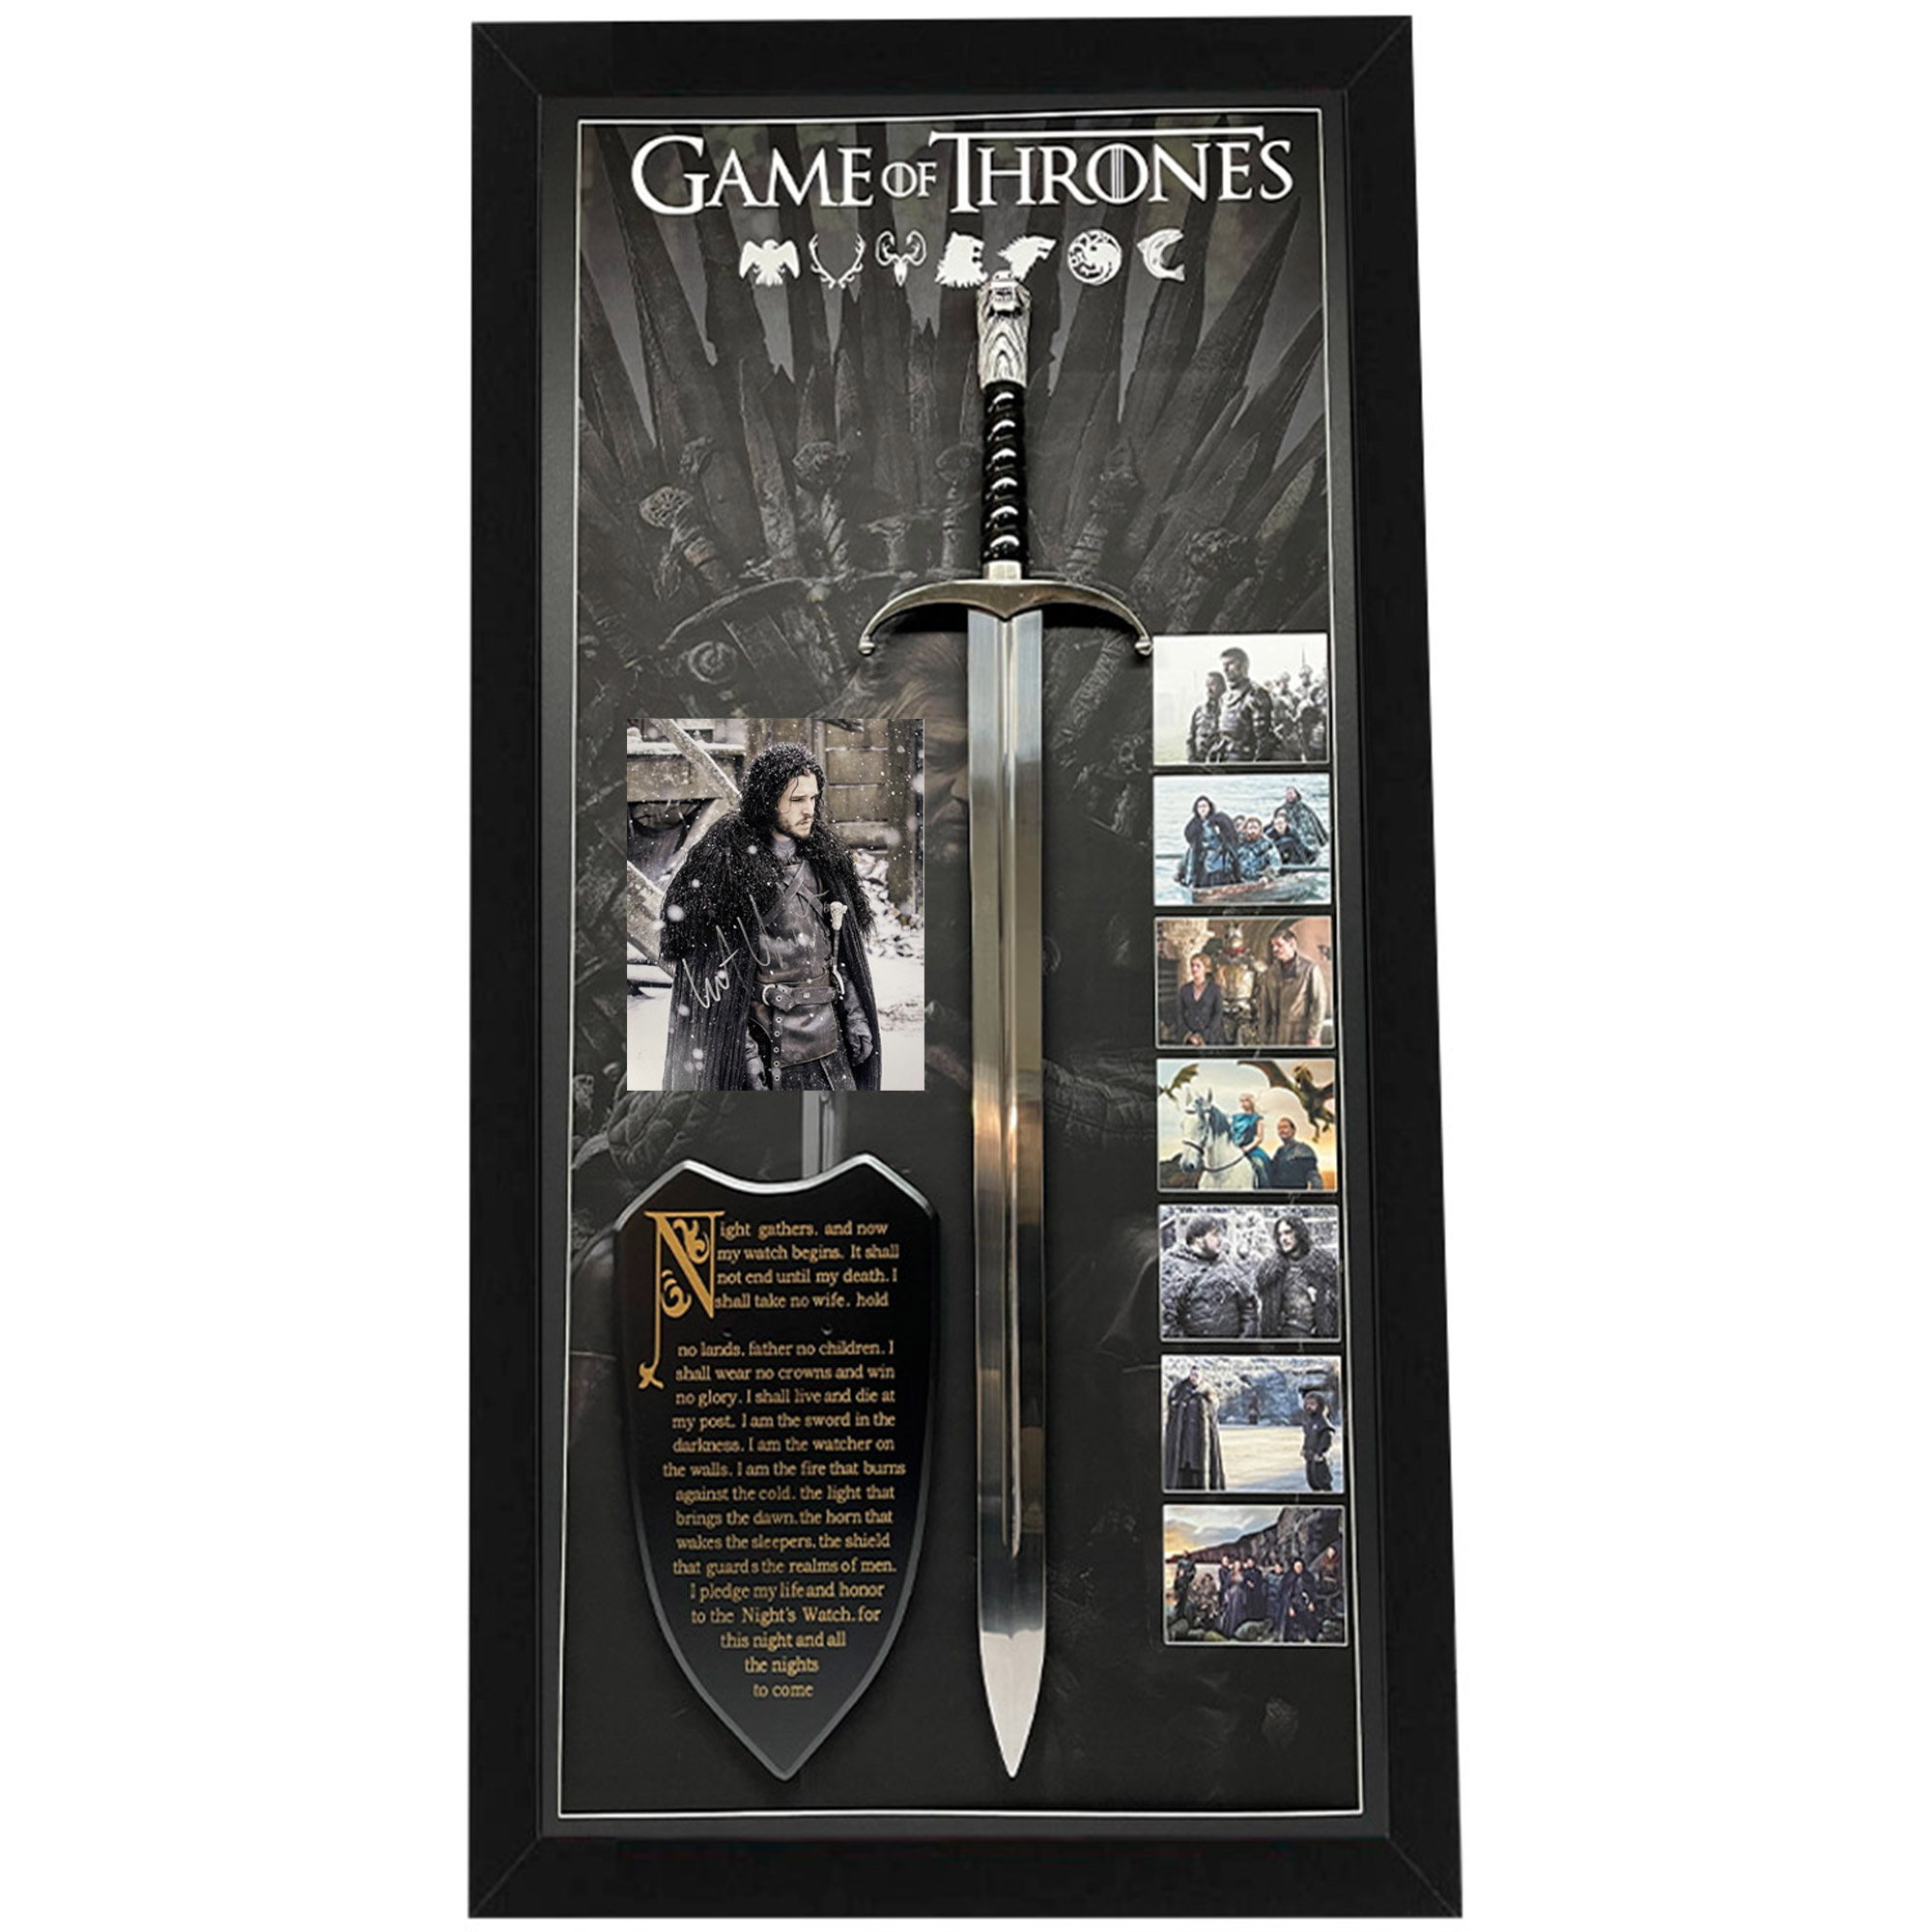 Game of Thrones – Kit Harington Hand Signed Photograph with Sword an...